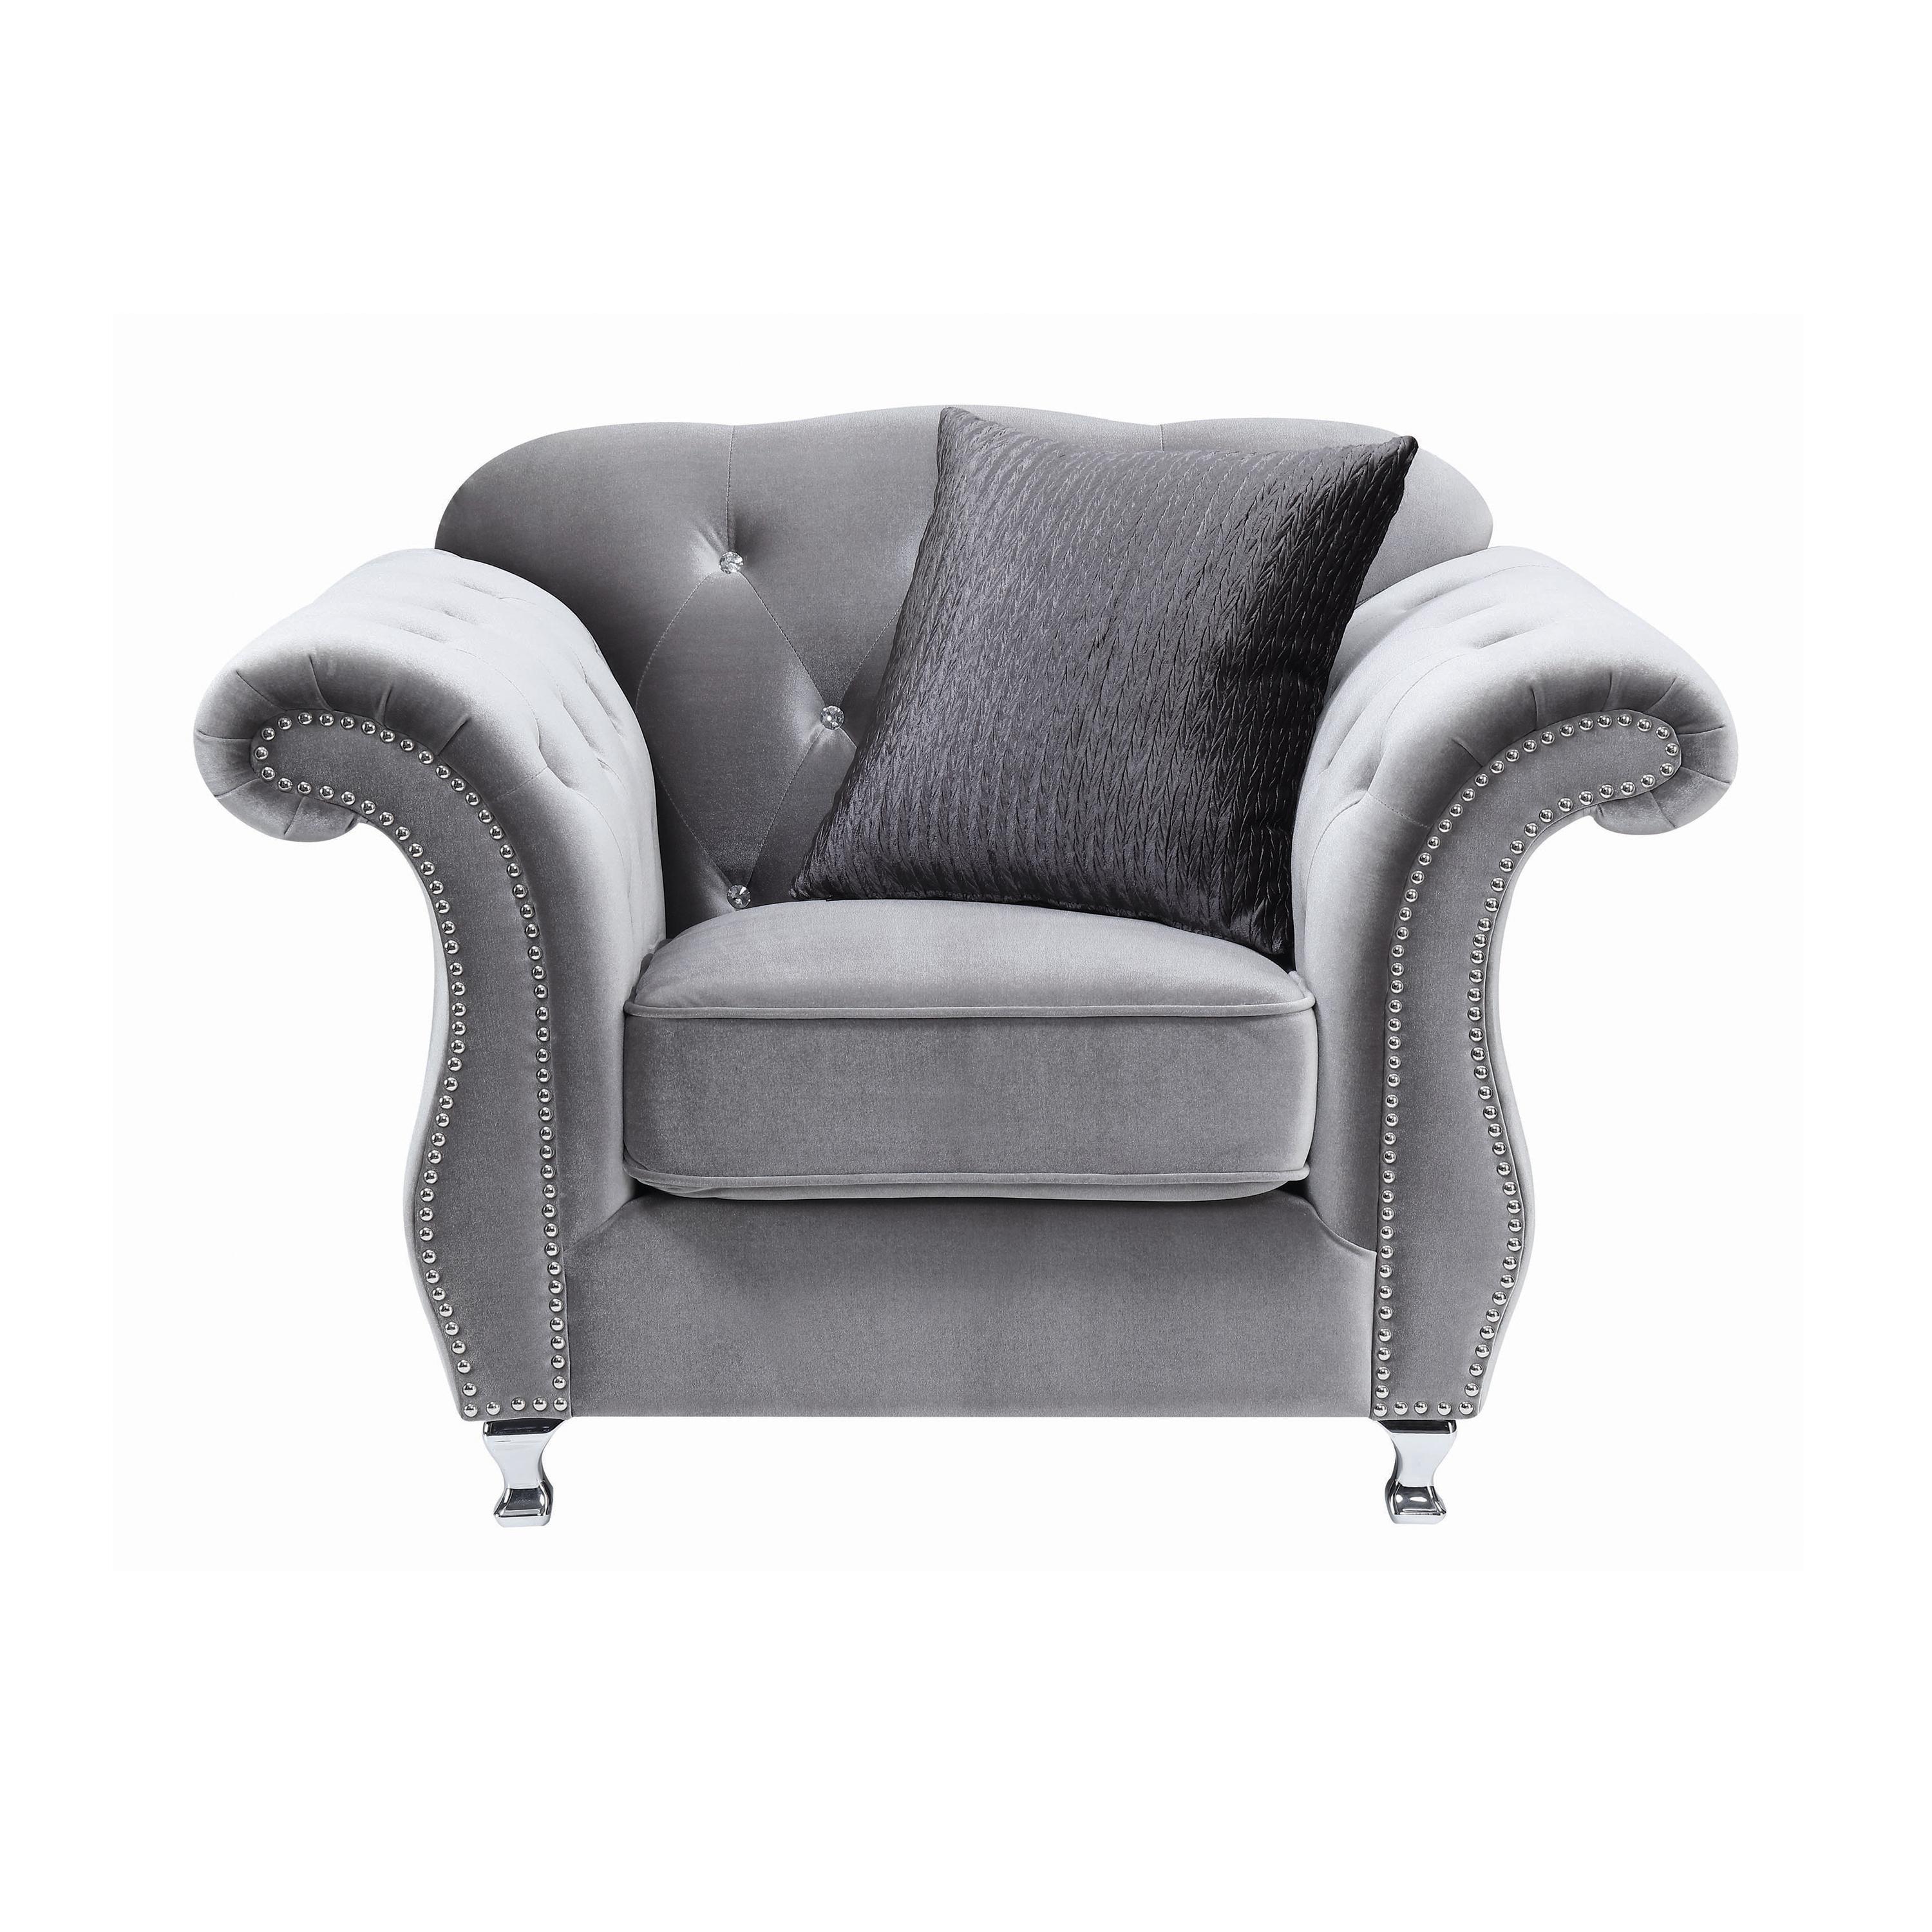 Contemporary Arm Chair 551163 Frostine 551163 in Silver Velvet